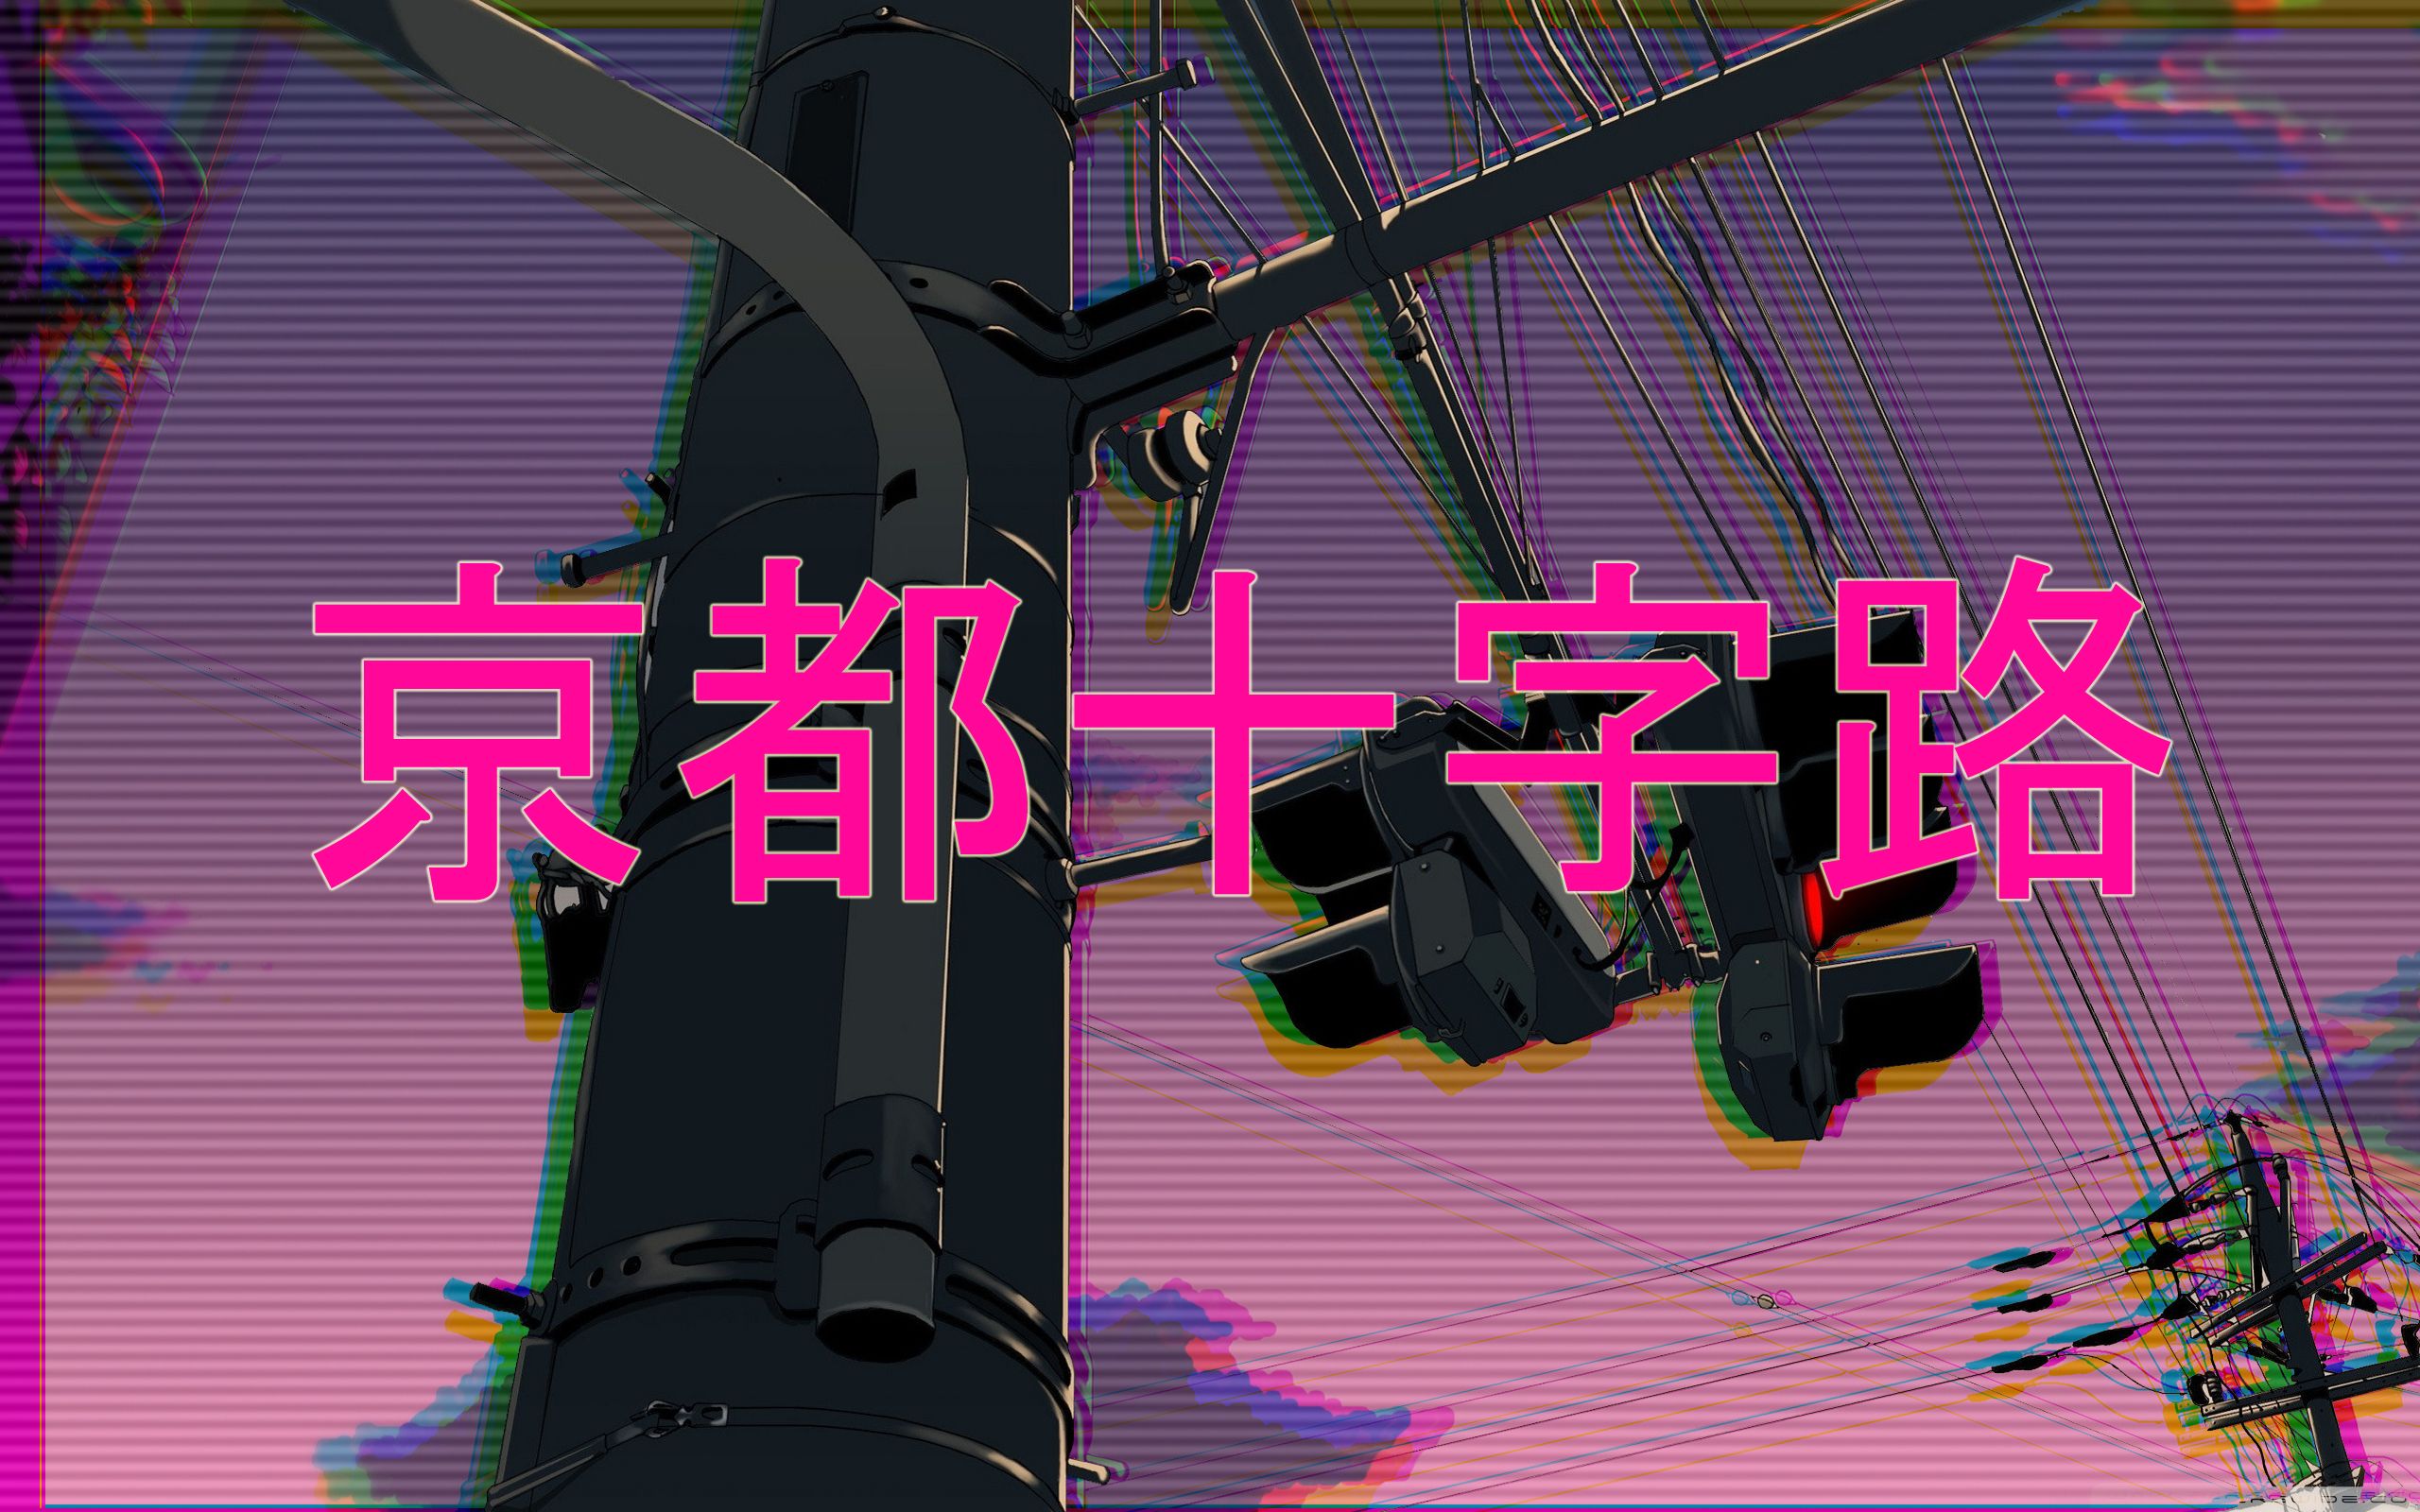 Vaporwave 4k Wallpapers For Your Desktop Or Mobile Screen Free And